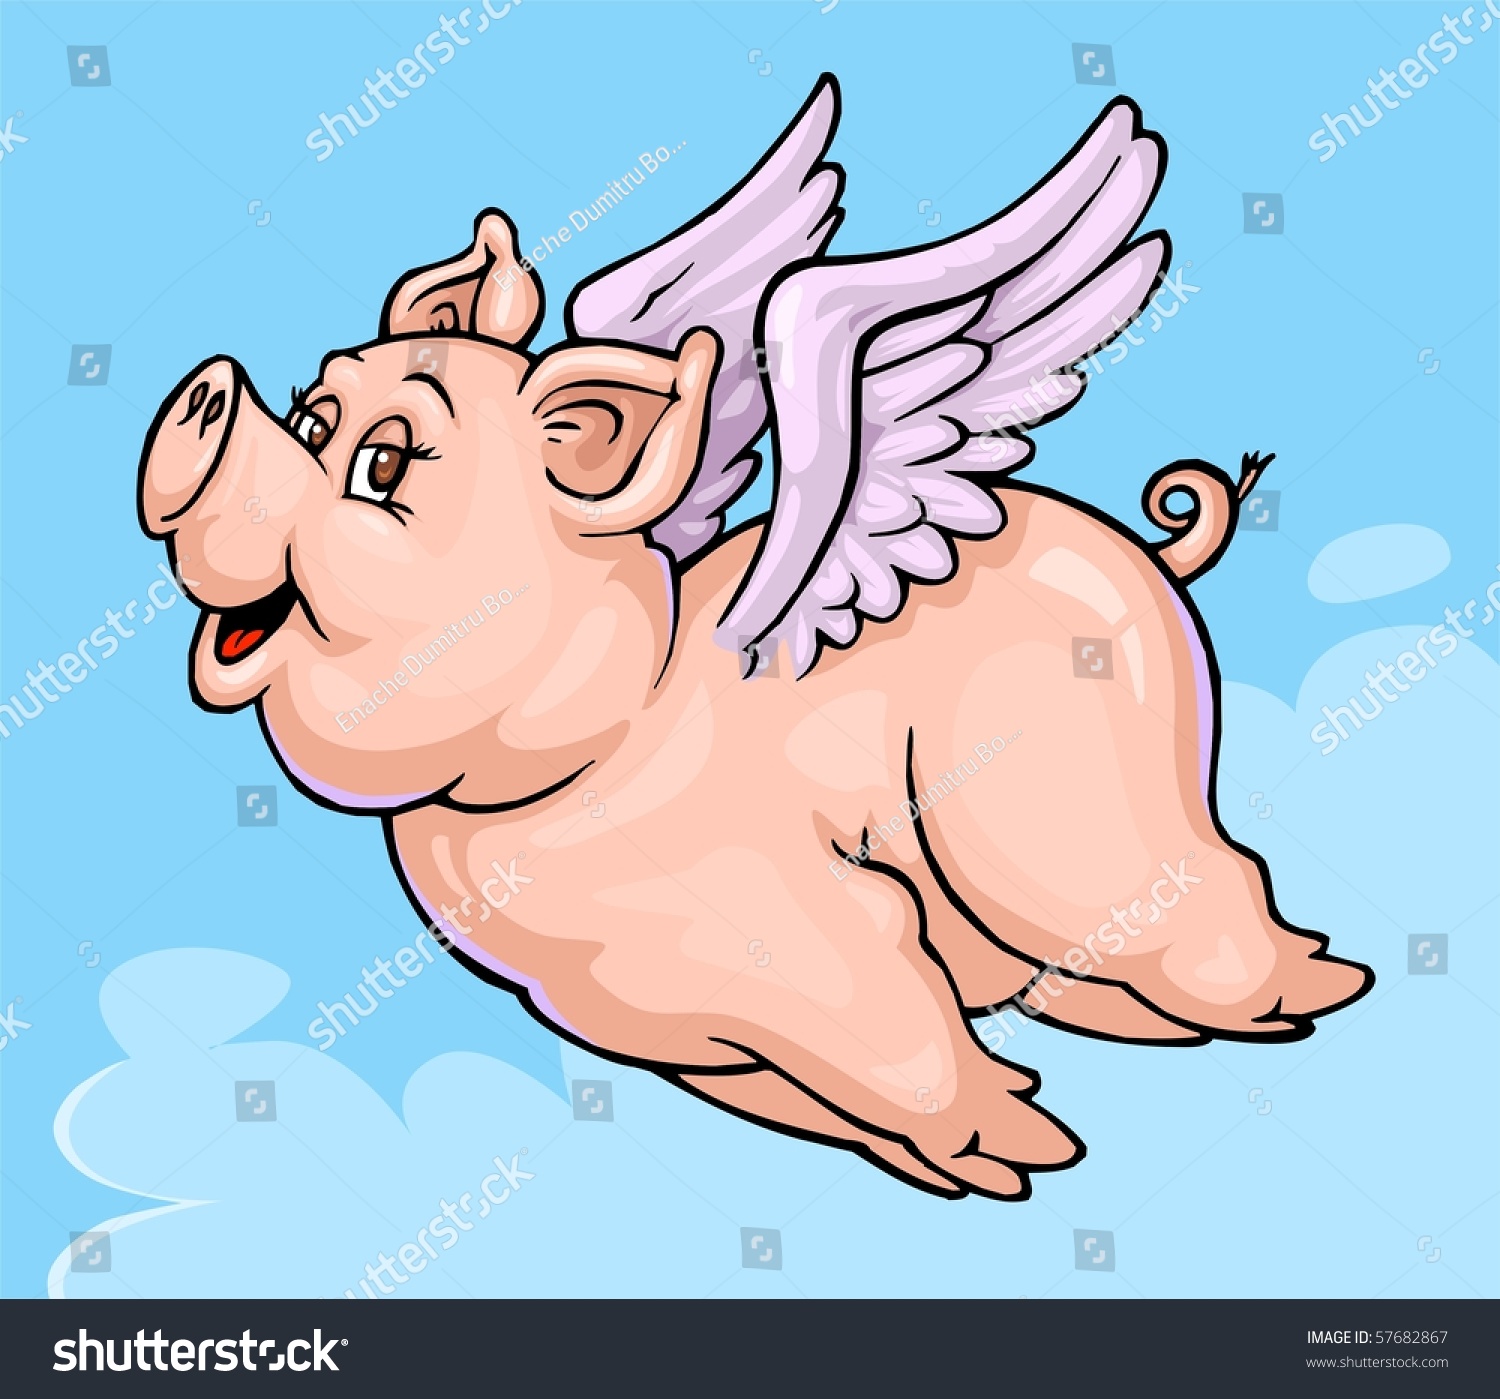 flying pig clipart - photo #44